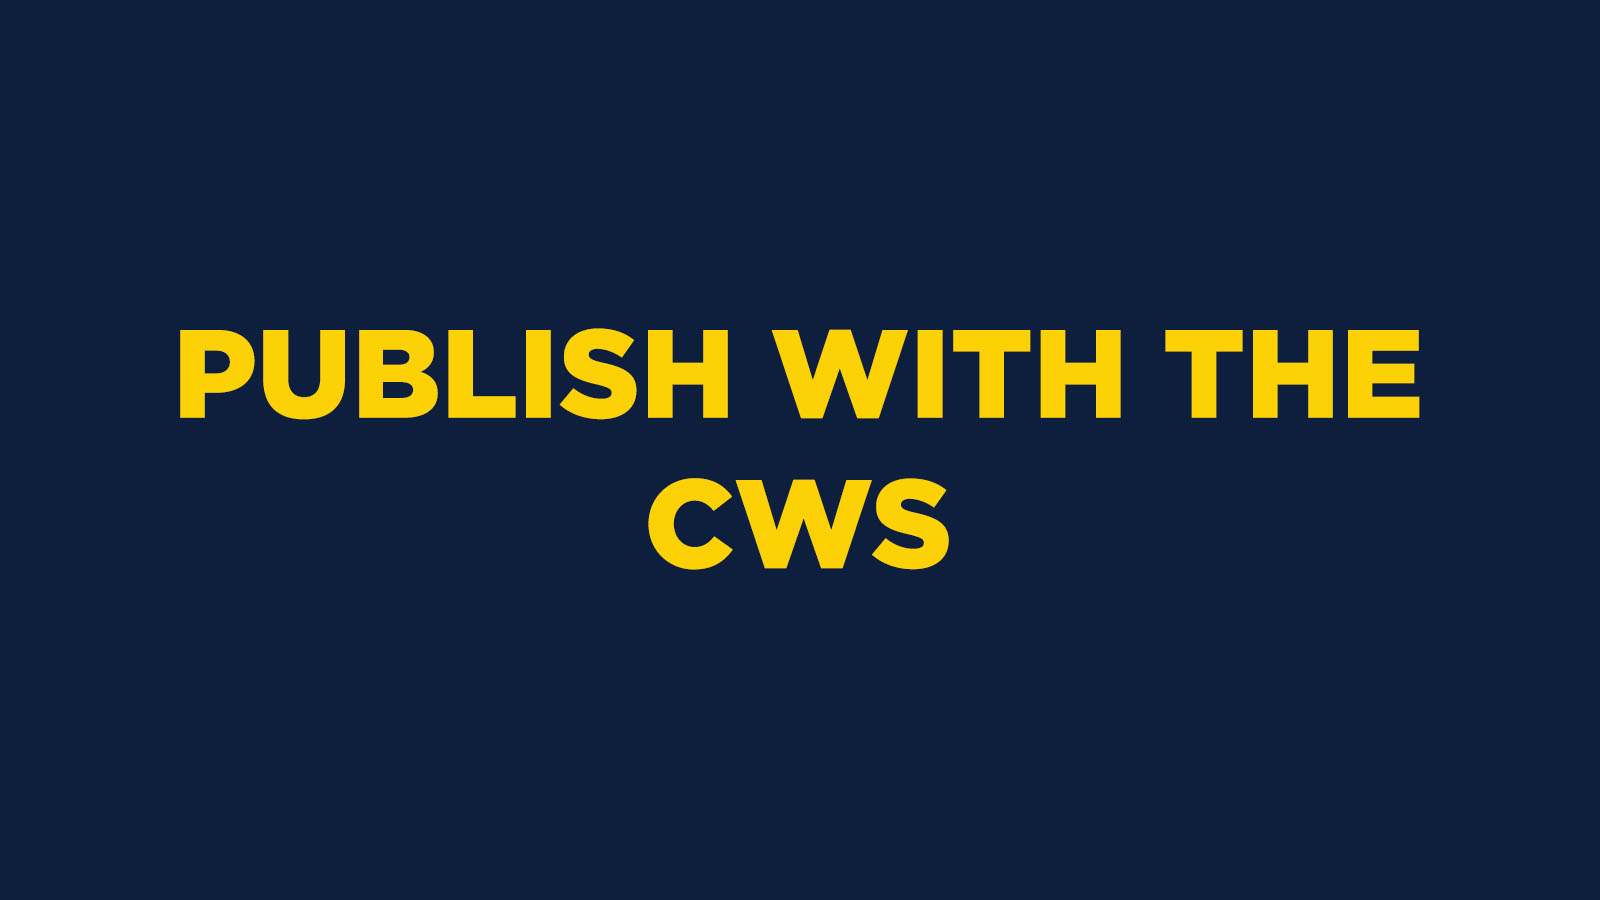 Publish with the CWS